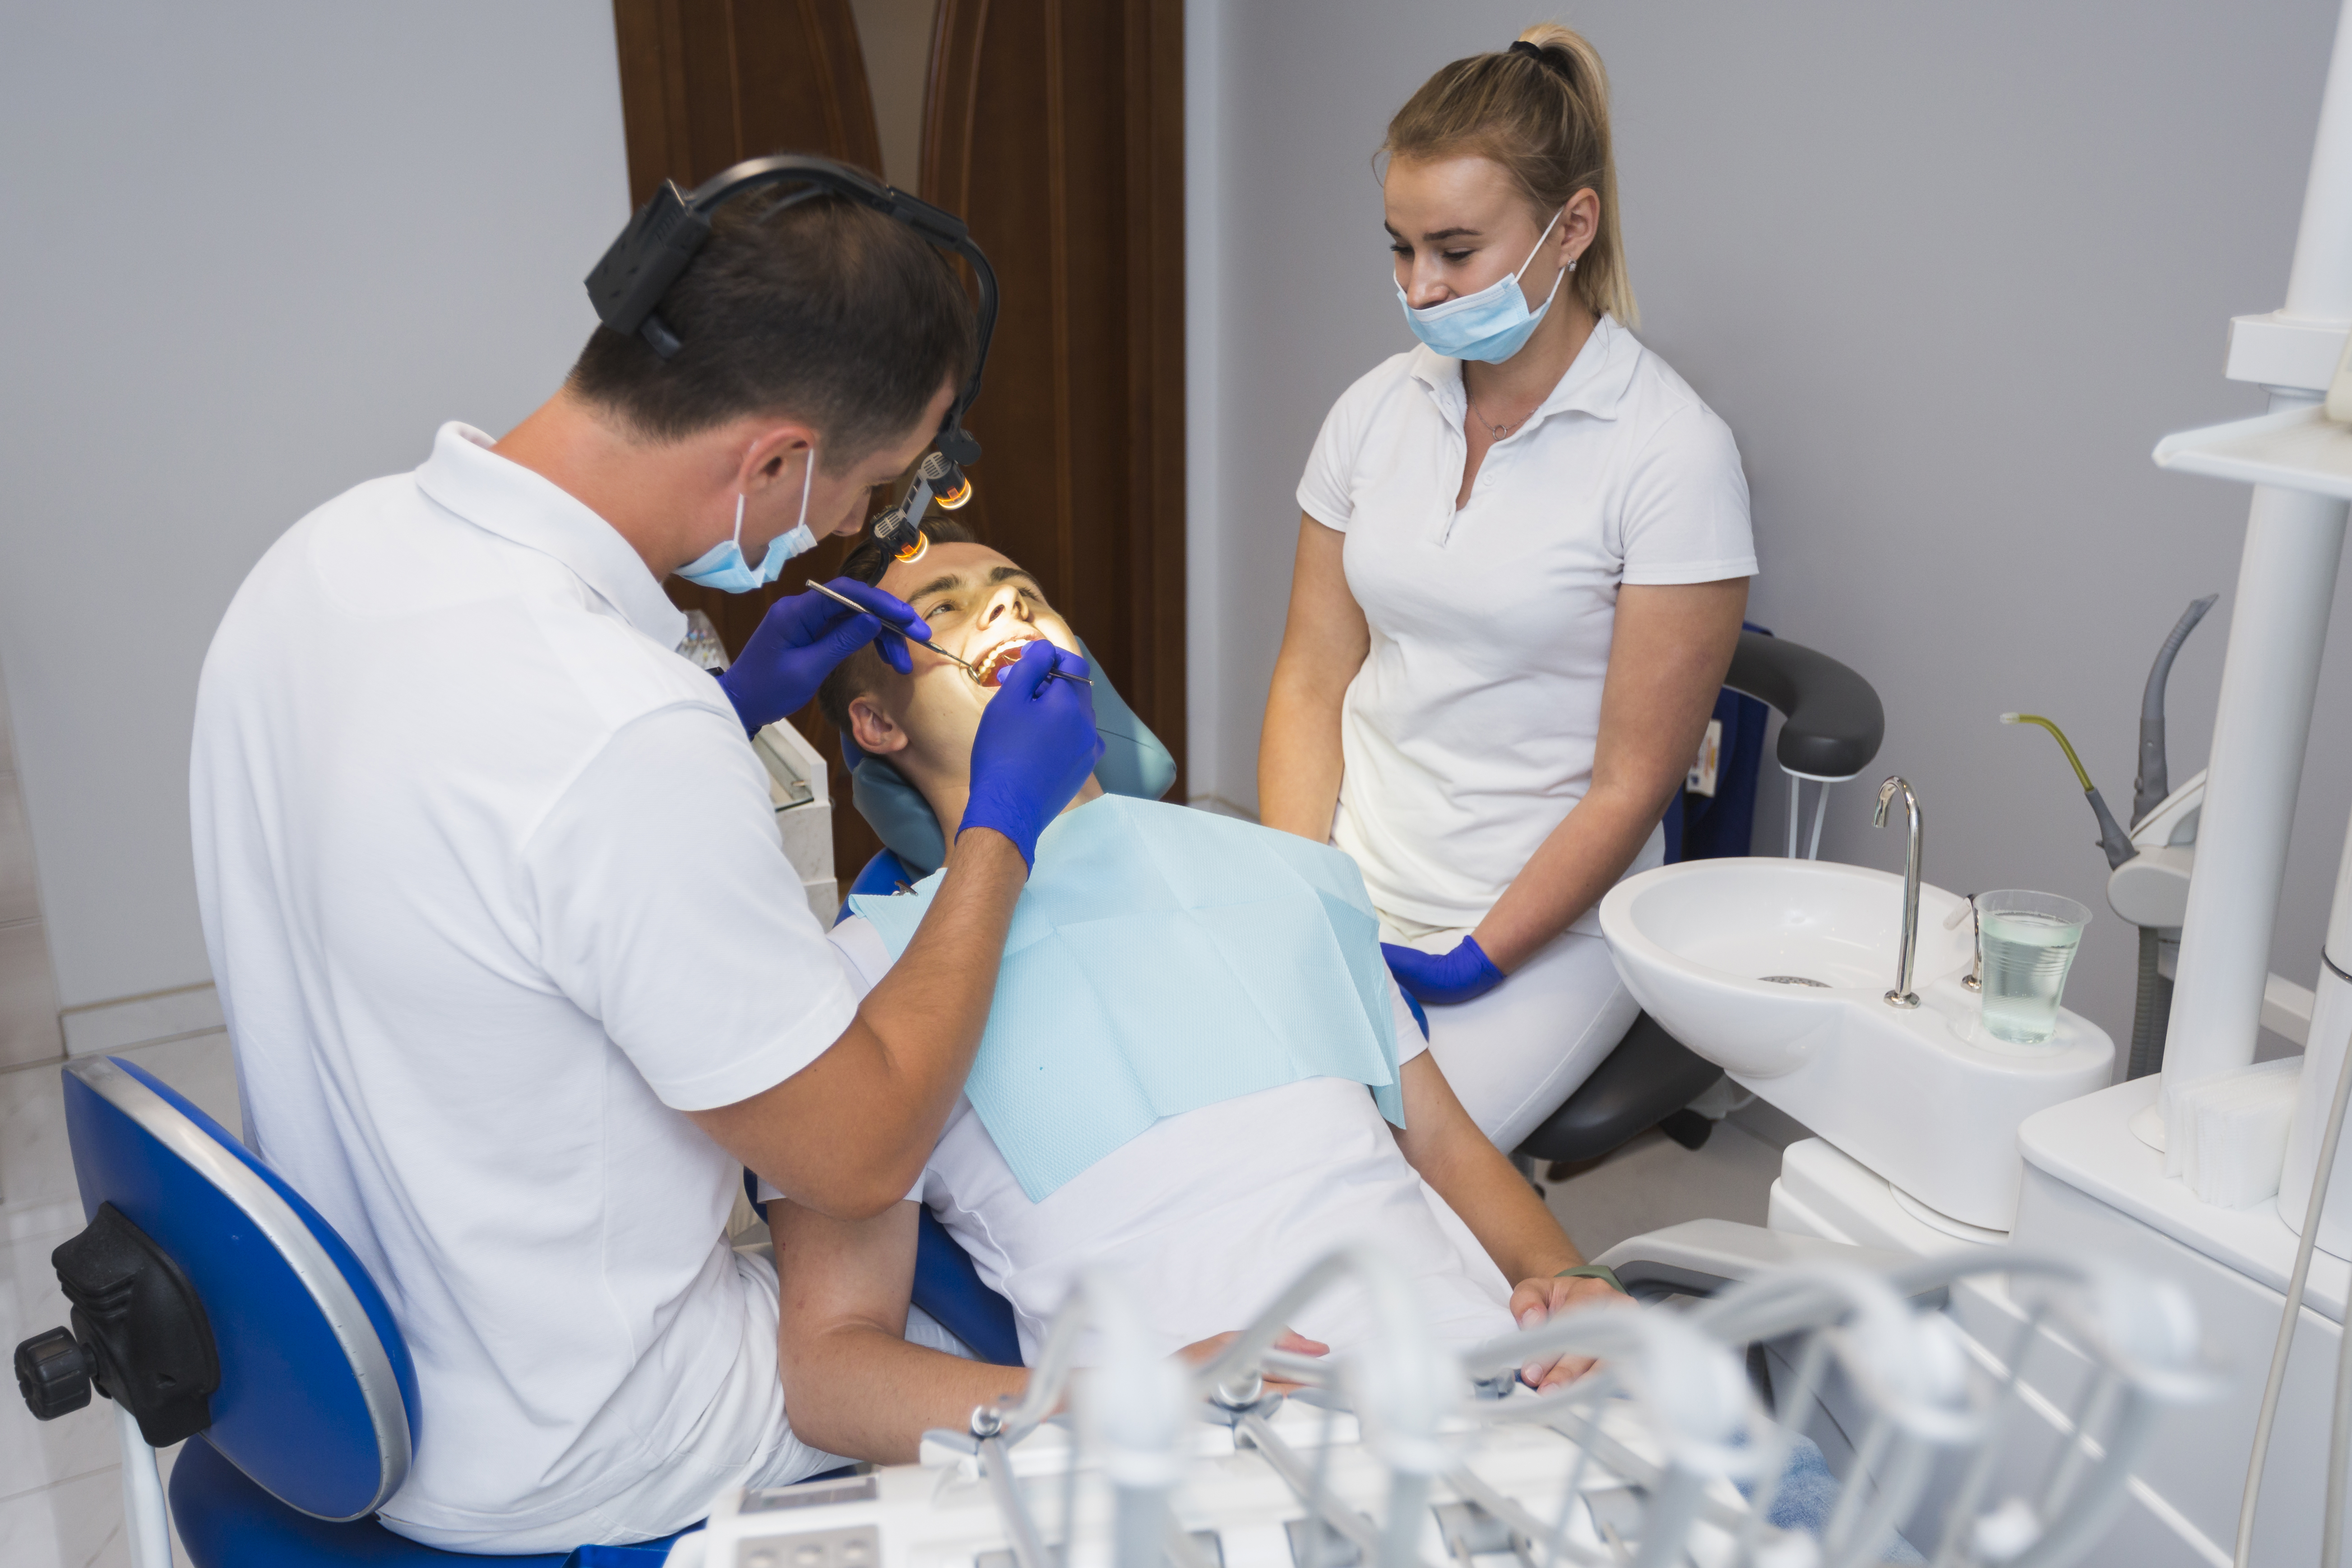 Finding the Best Dental Clinics and Surgeons for Your Needs